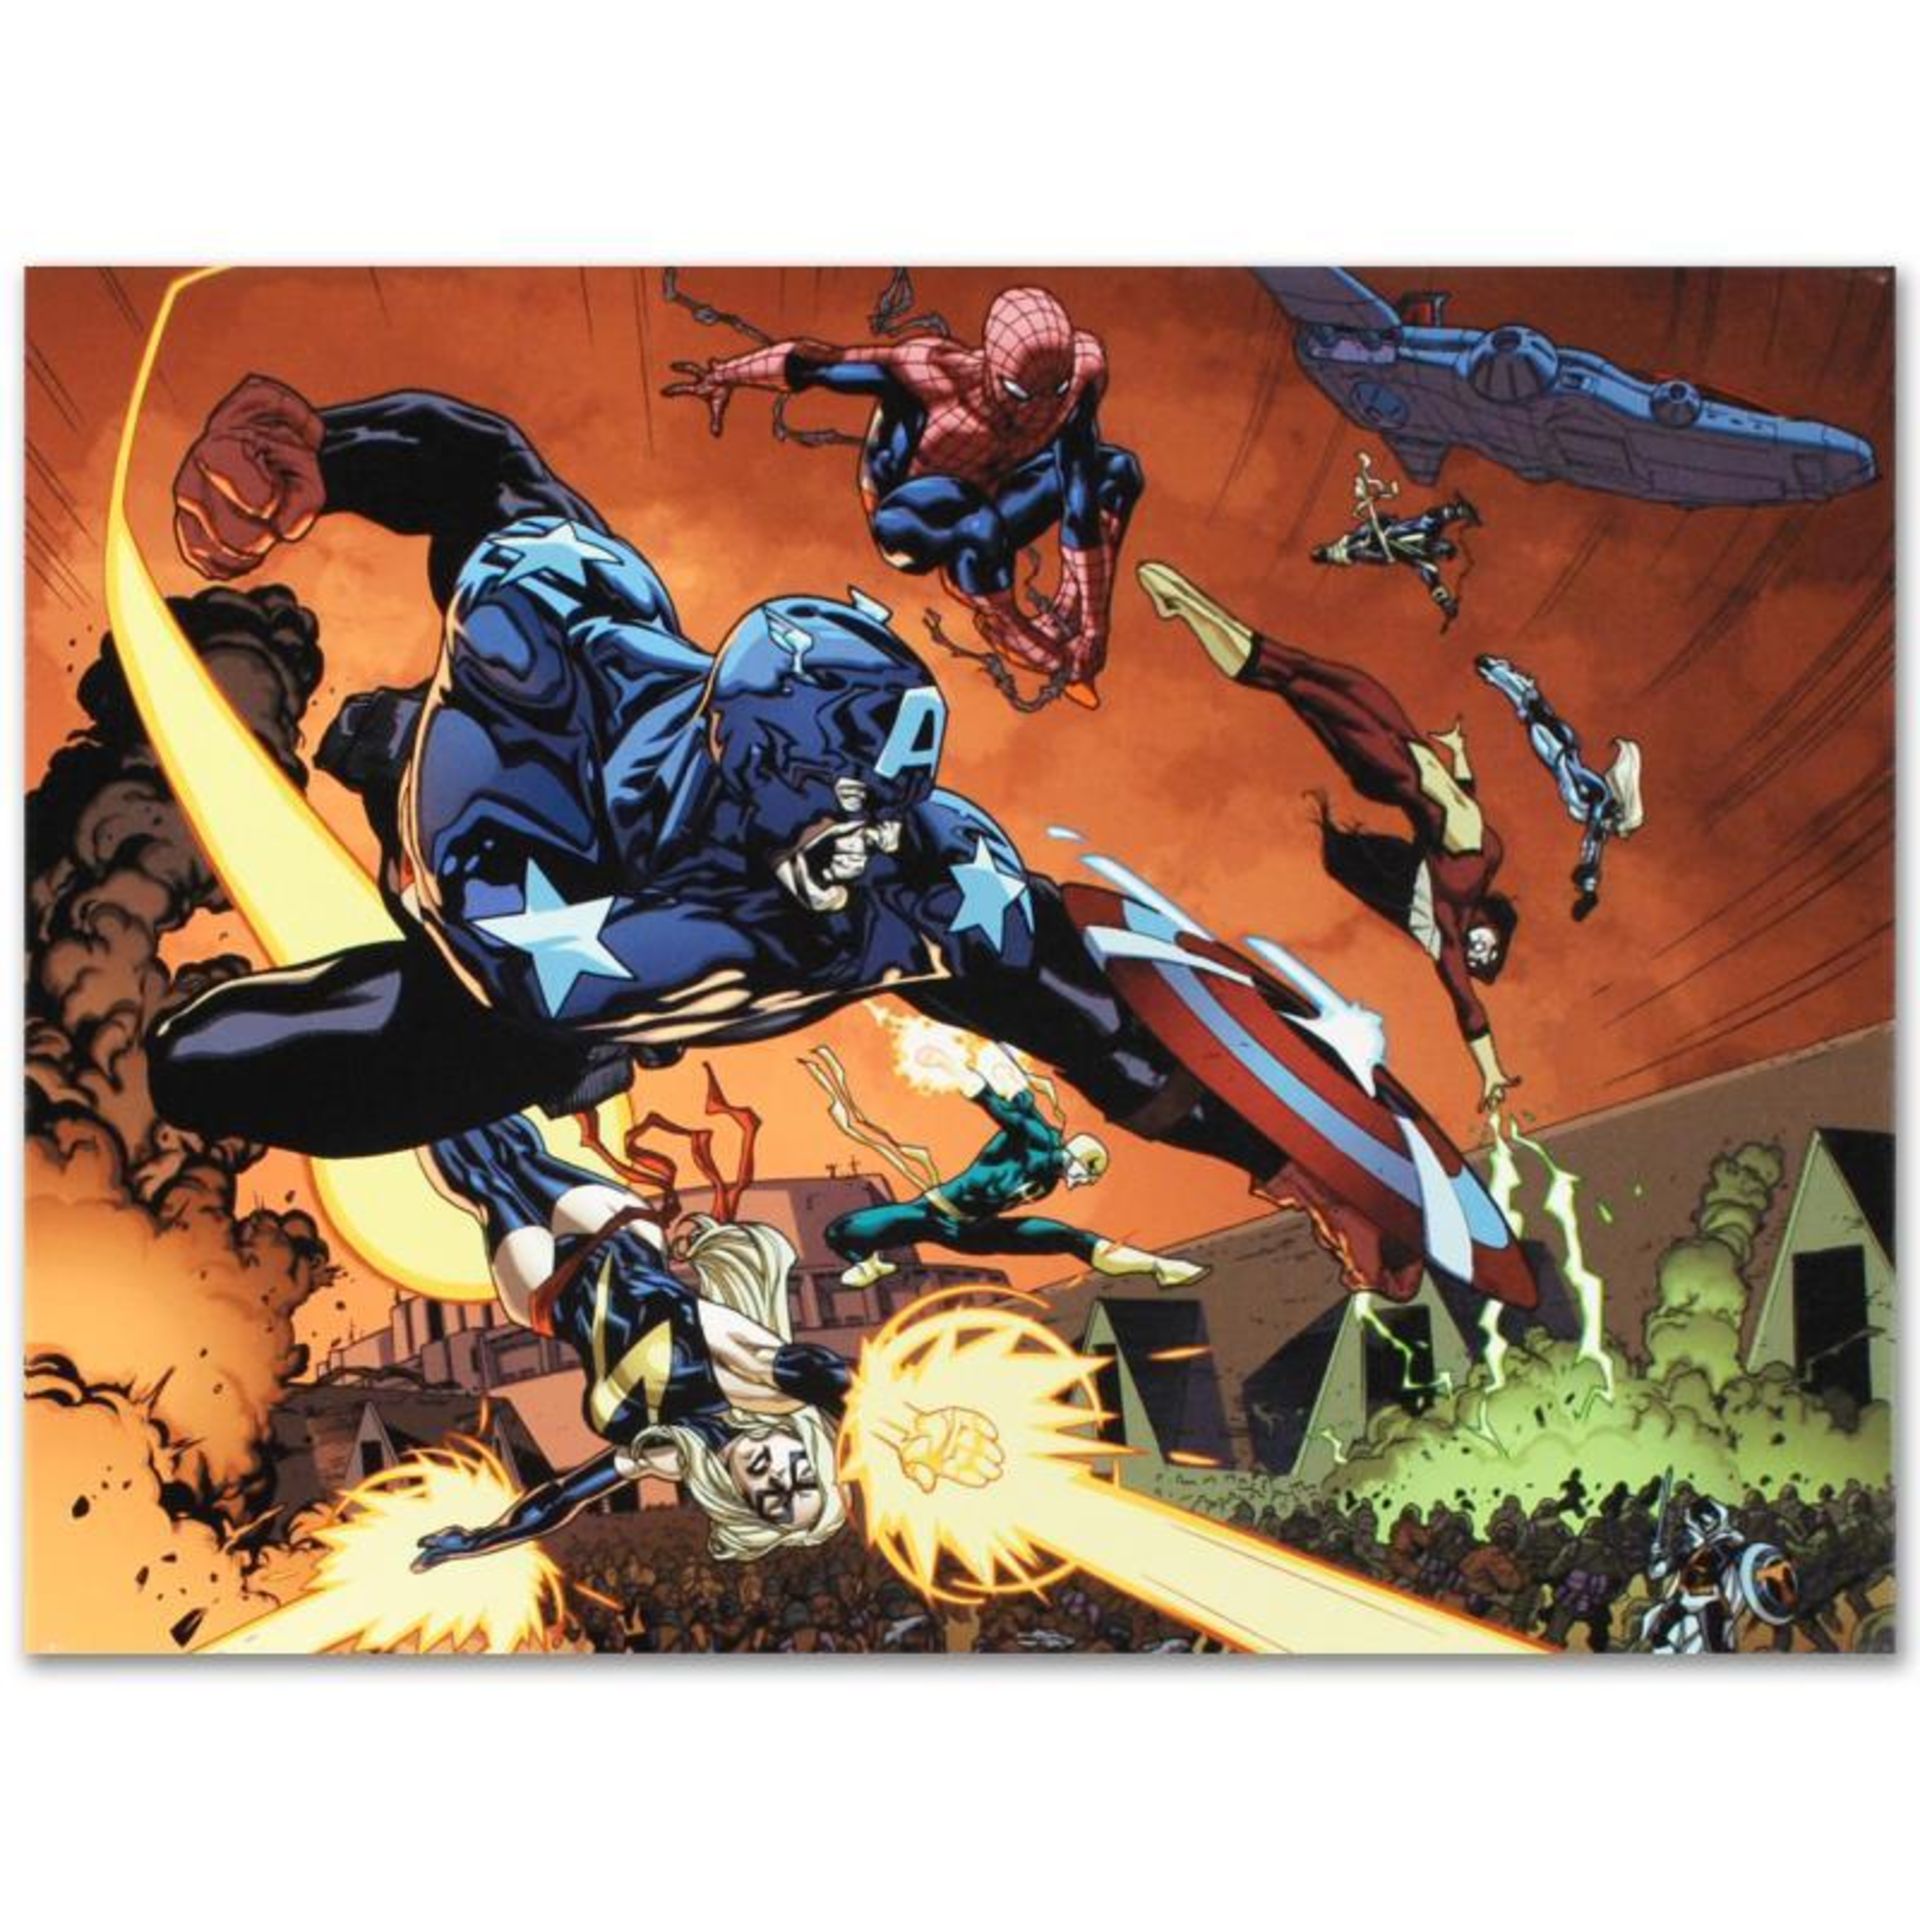 Marvel Comics "New Avengers #59" Numbered Limited Edition Giclee on Canvas by St